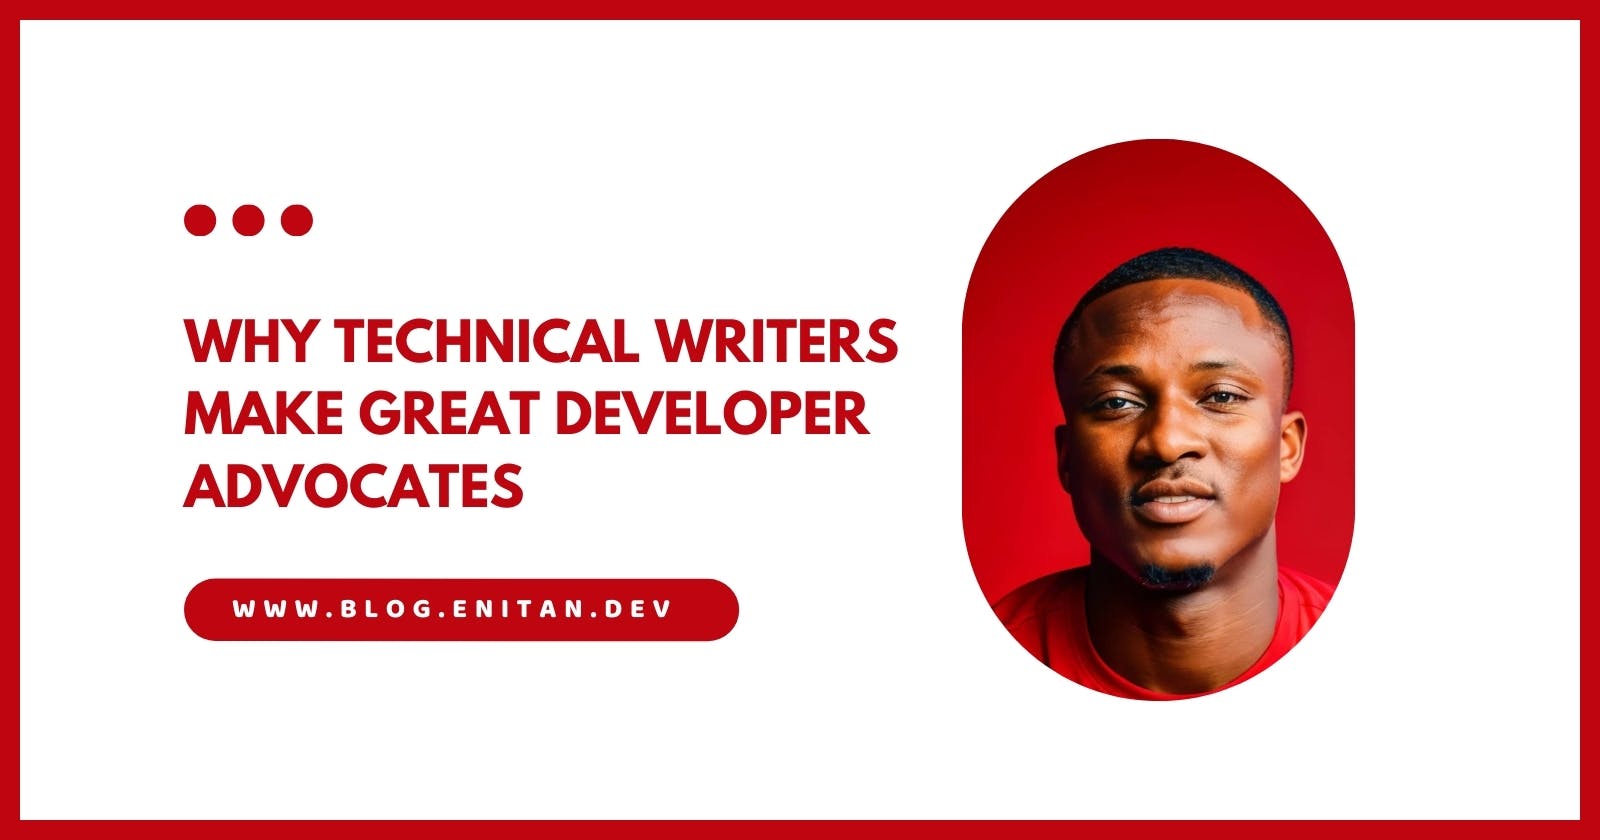 Why Technical Writers Make Great Developer Advocates